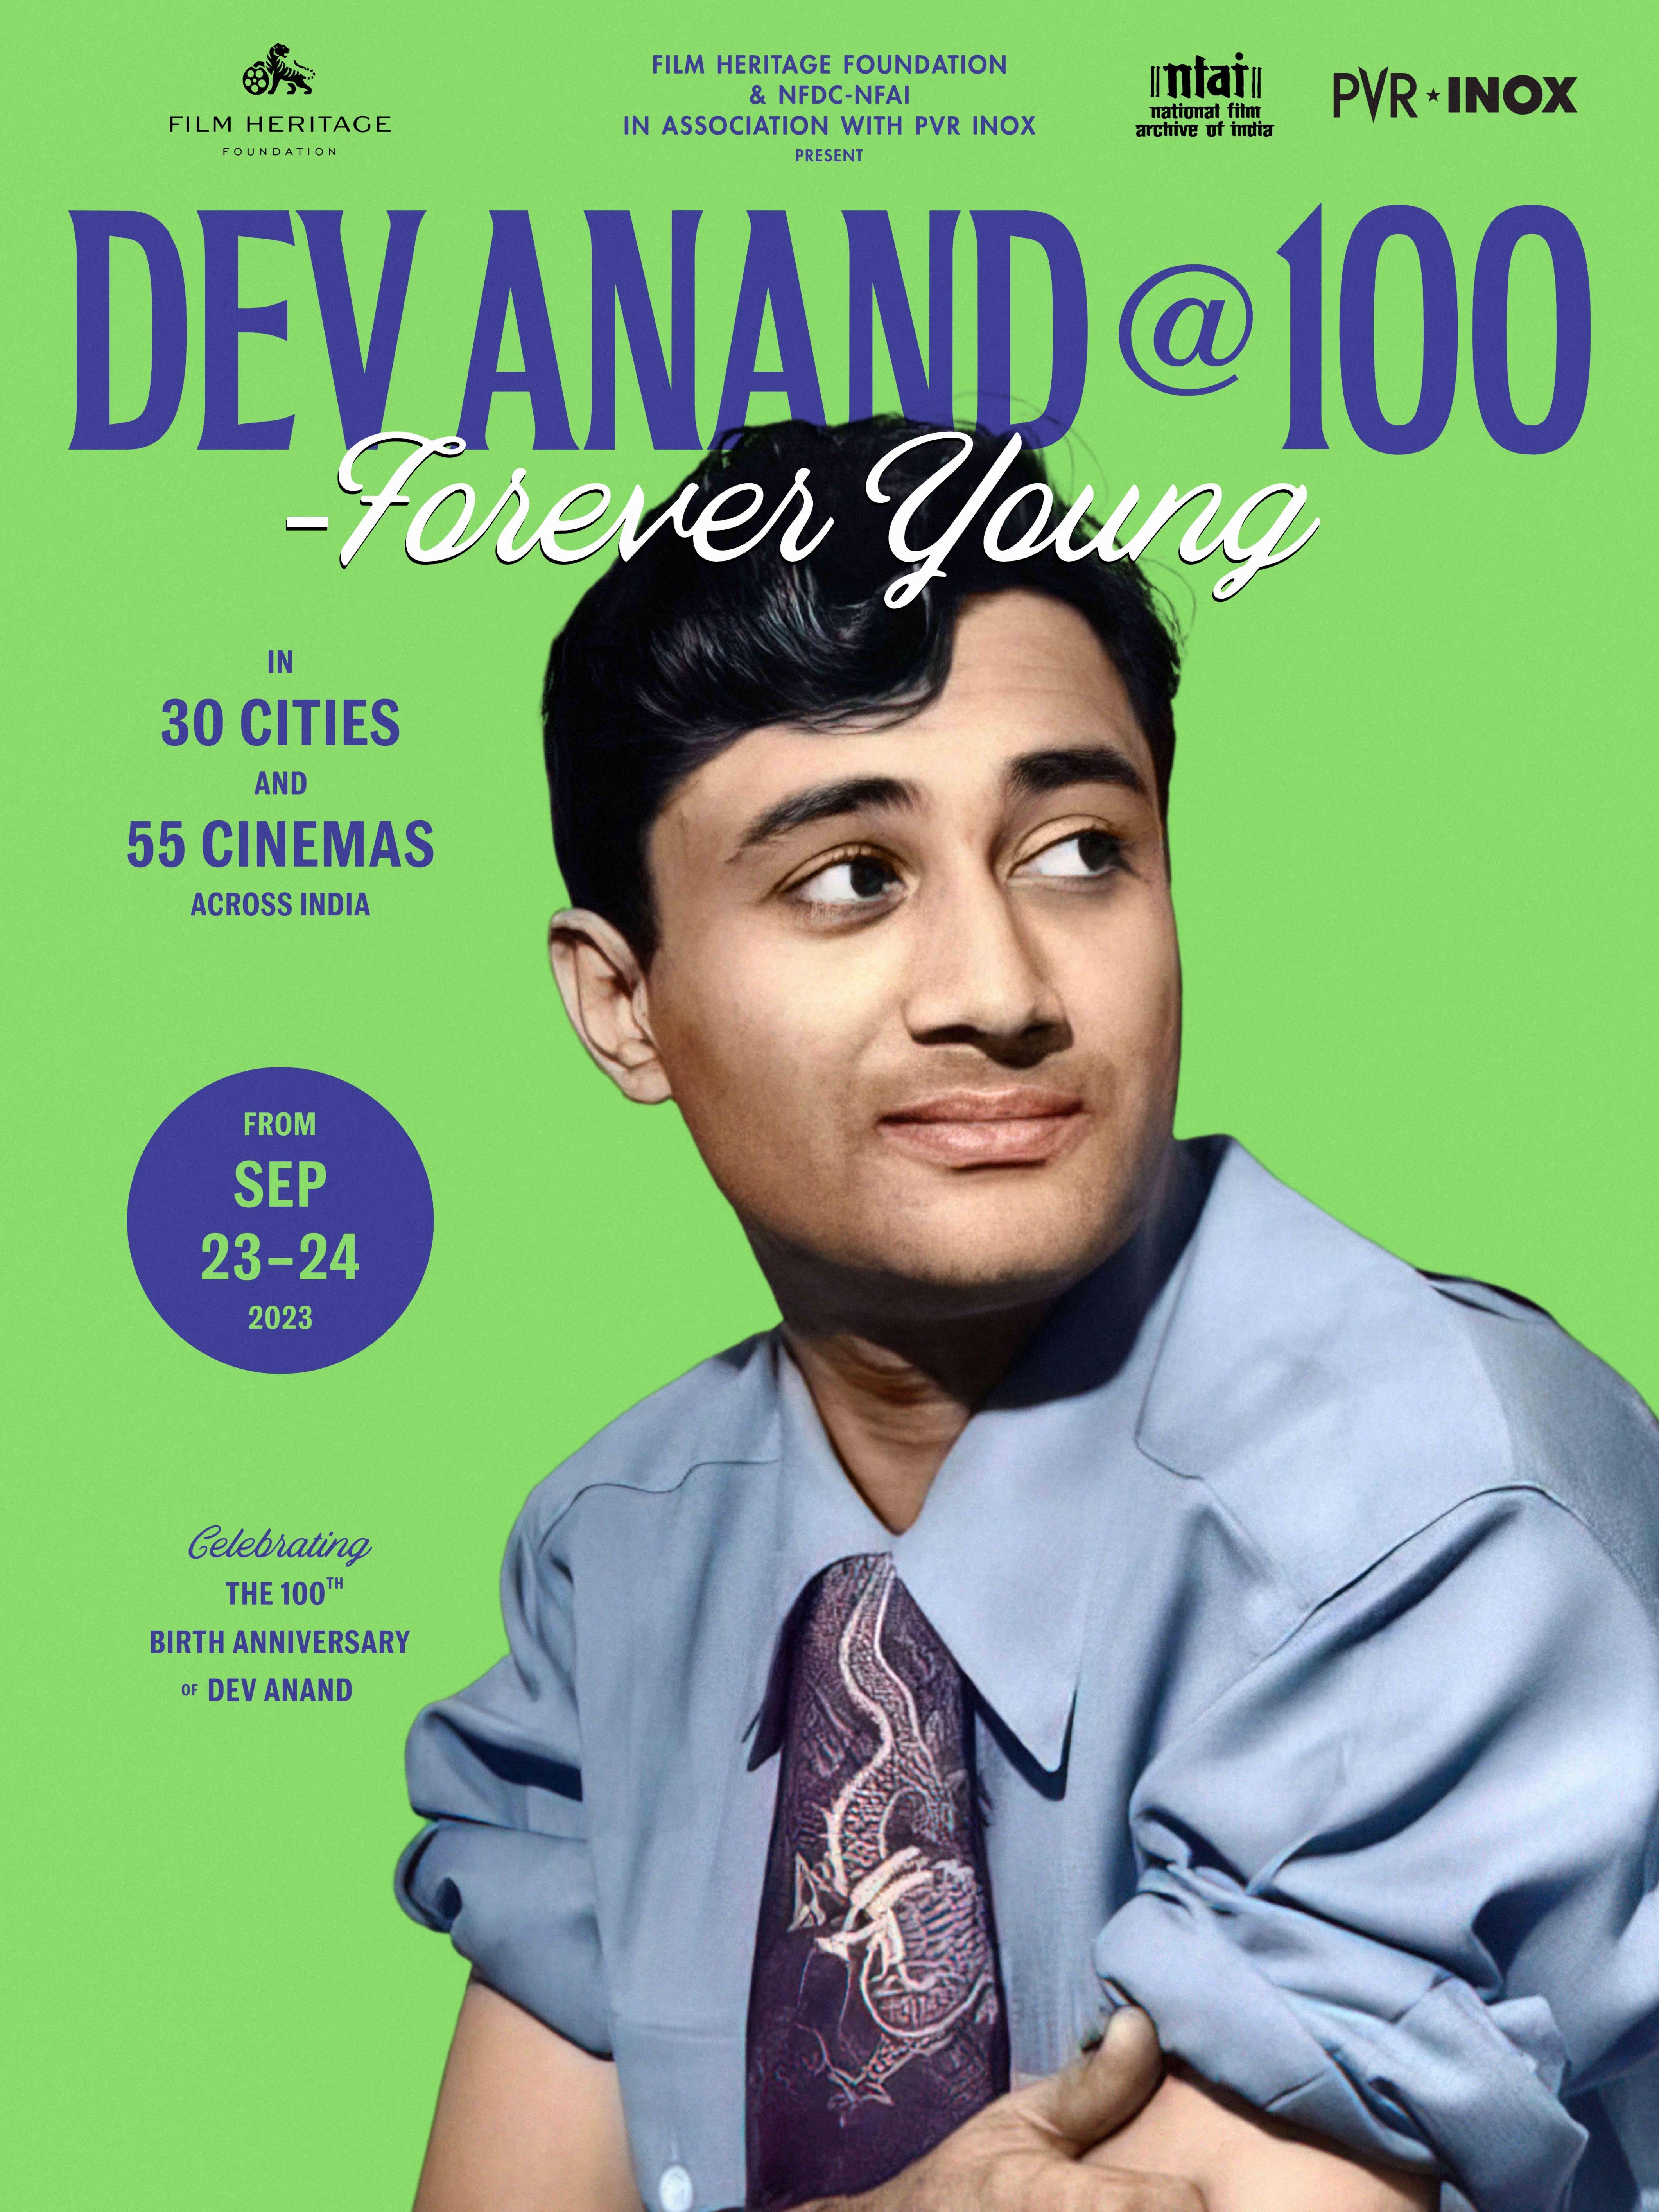 Dev Anand@100 - Forever Young